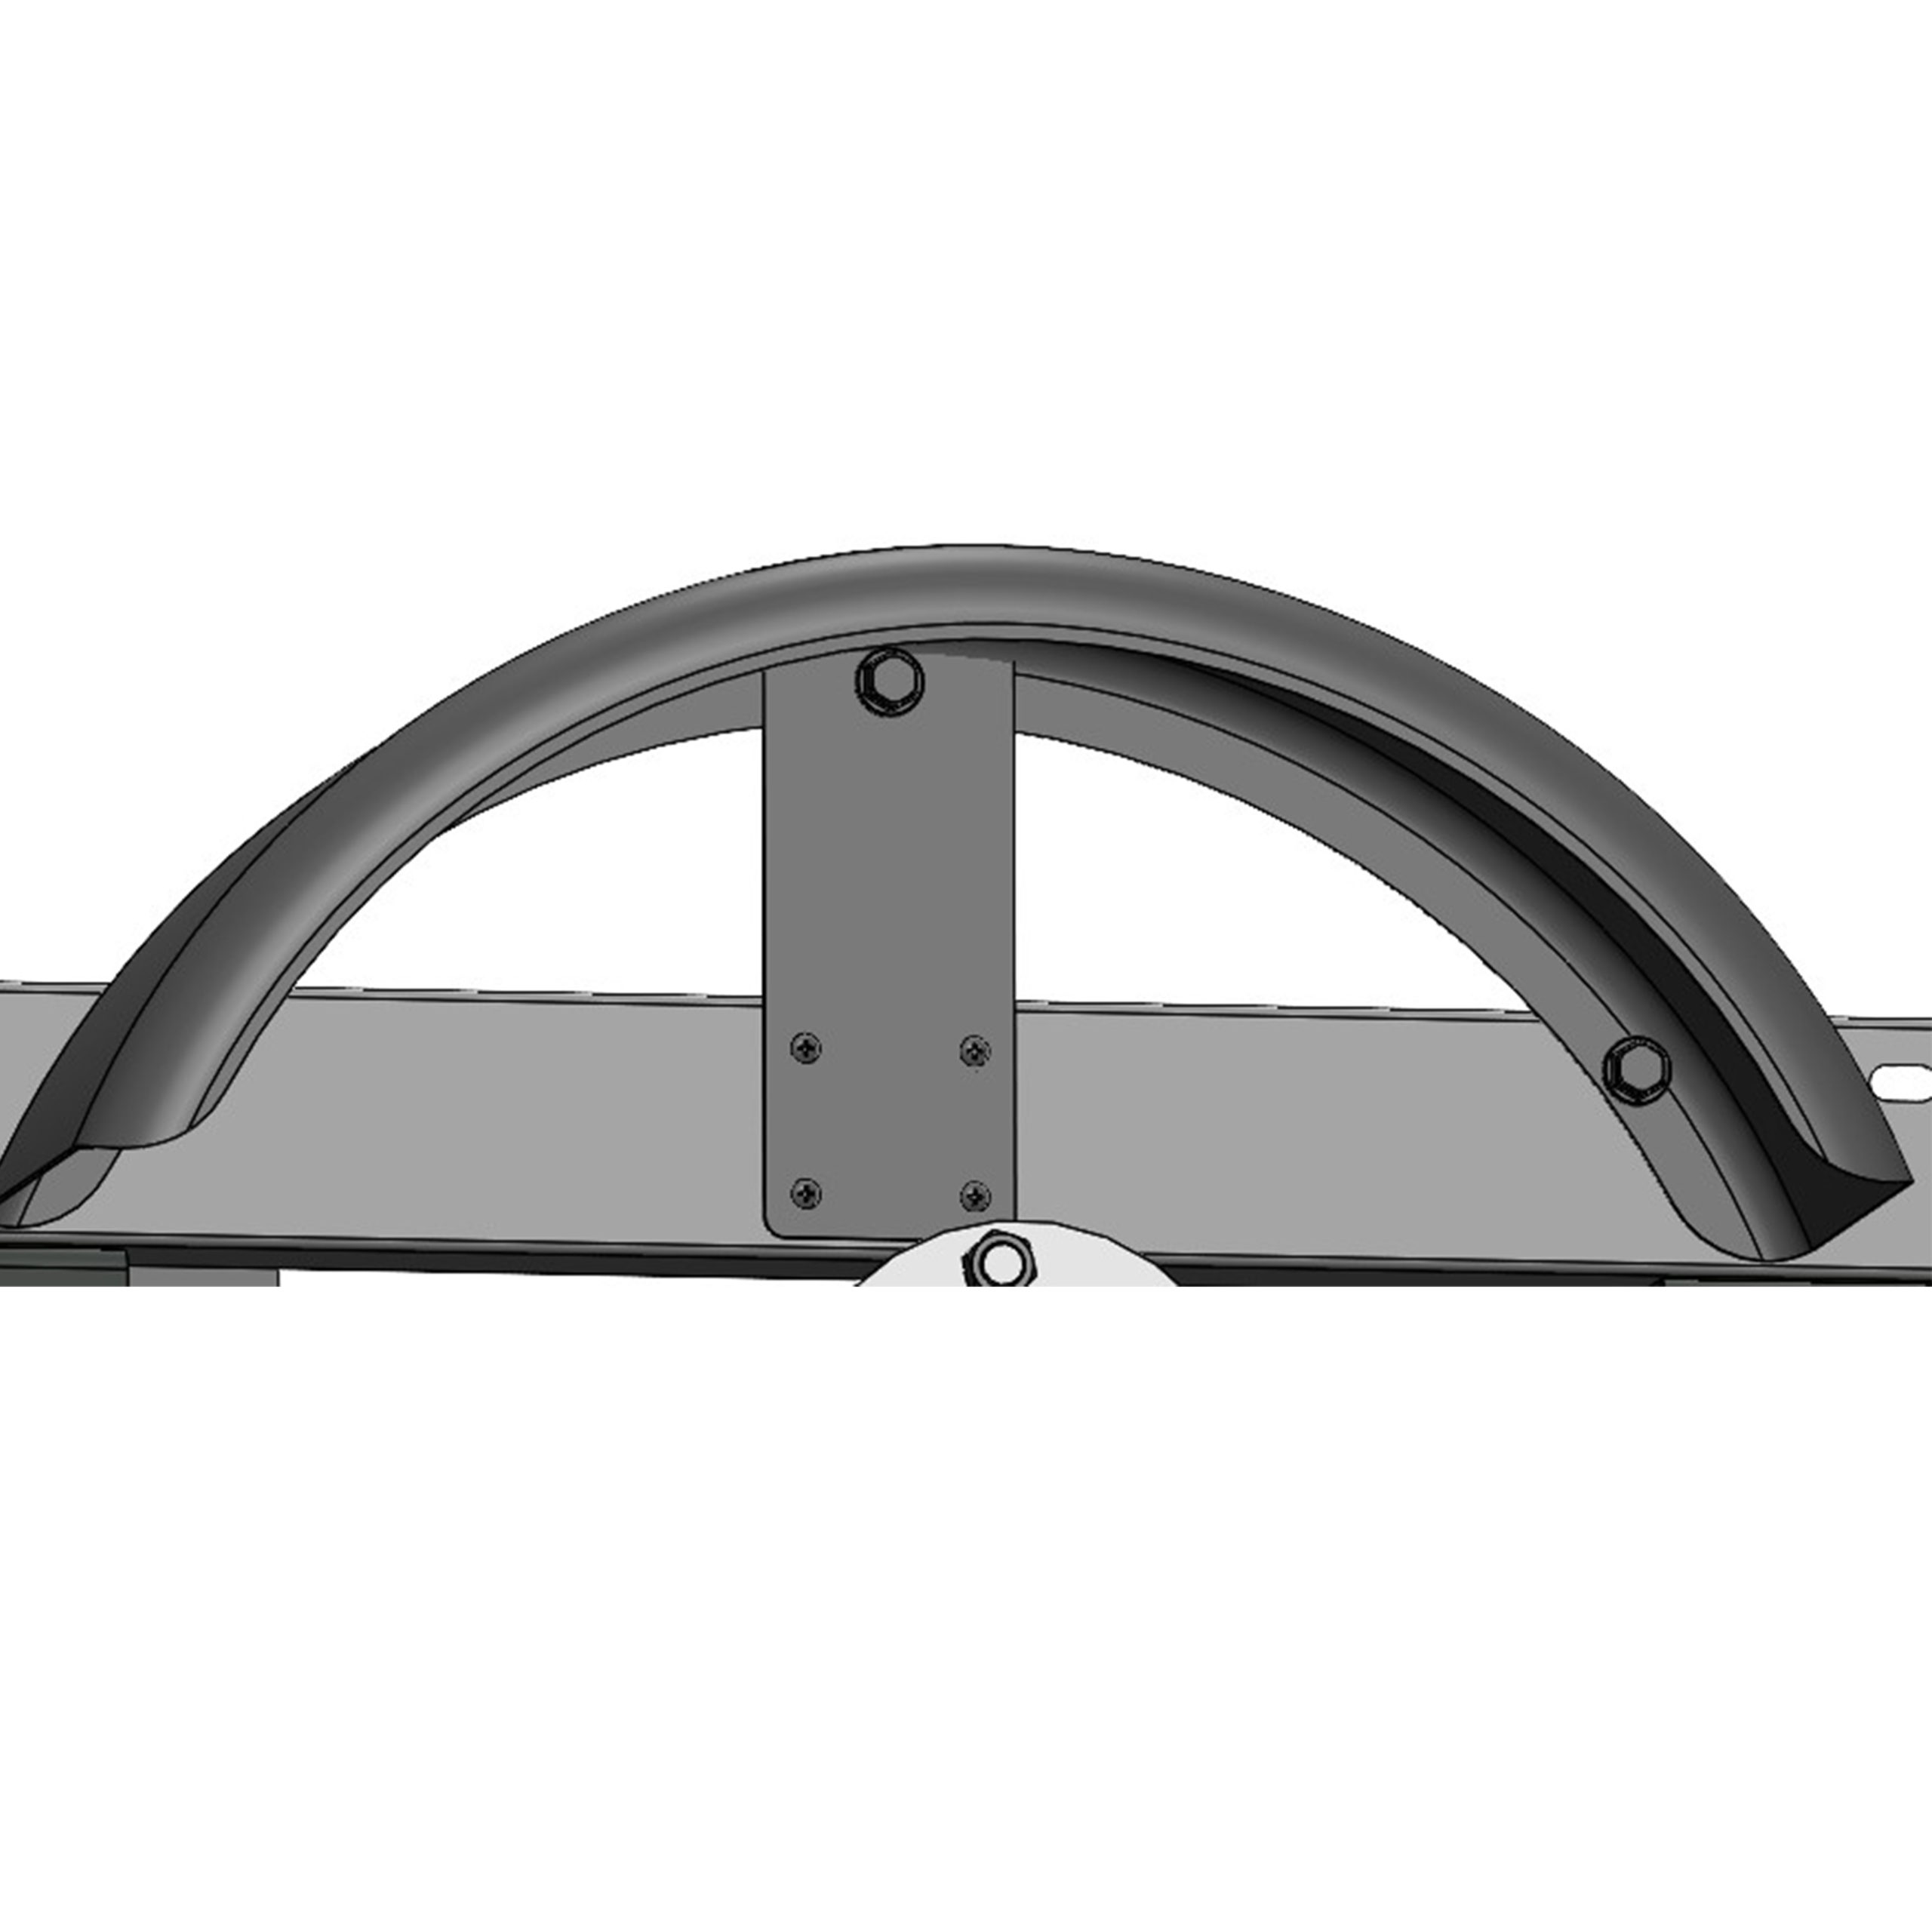 Fender Plate for 8-in Tire (one piece)